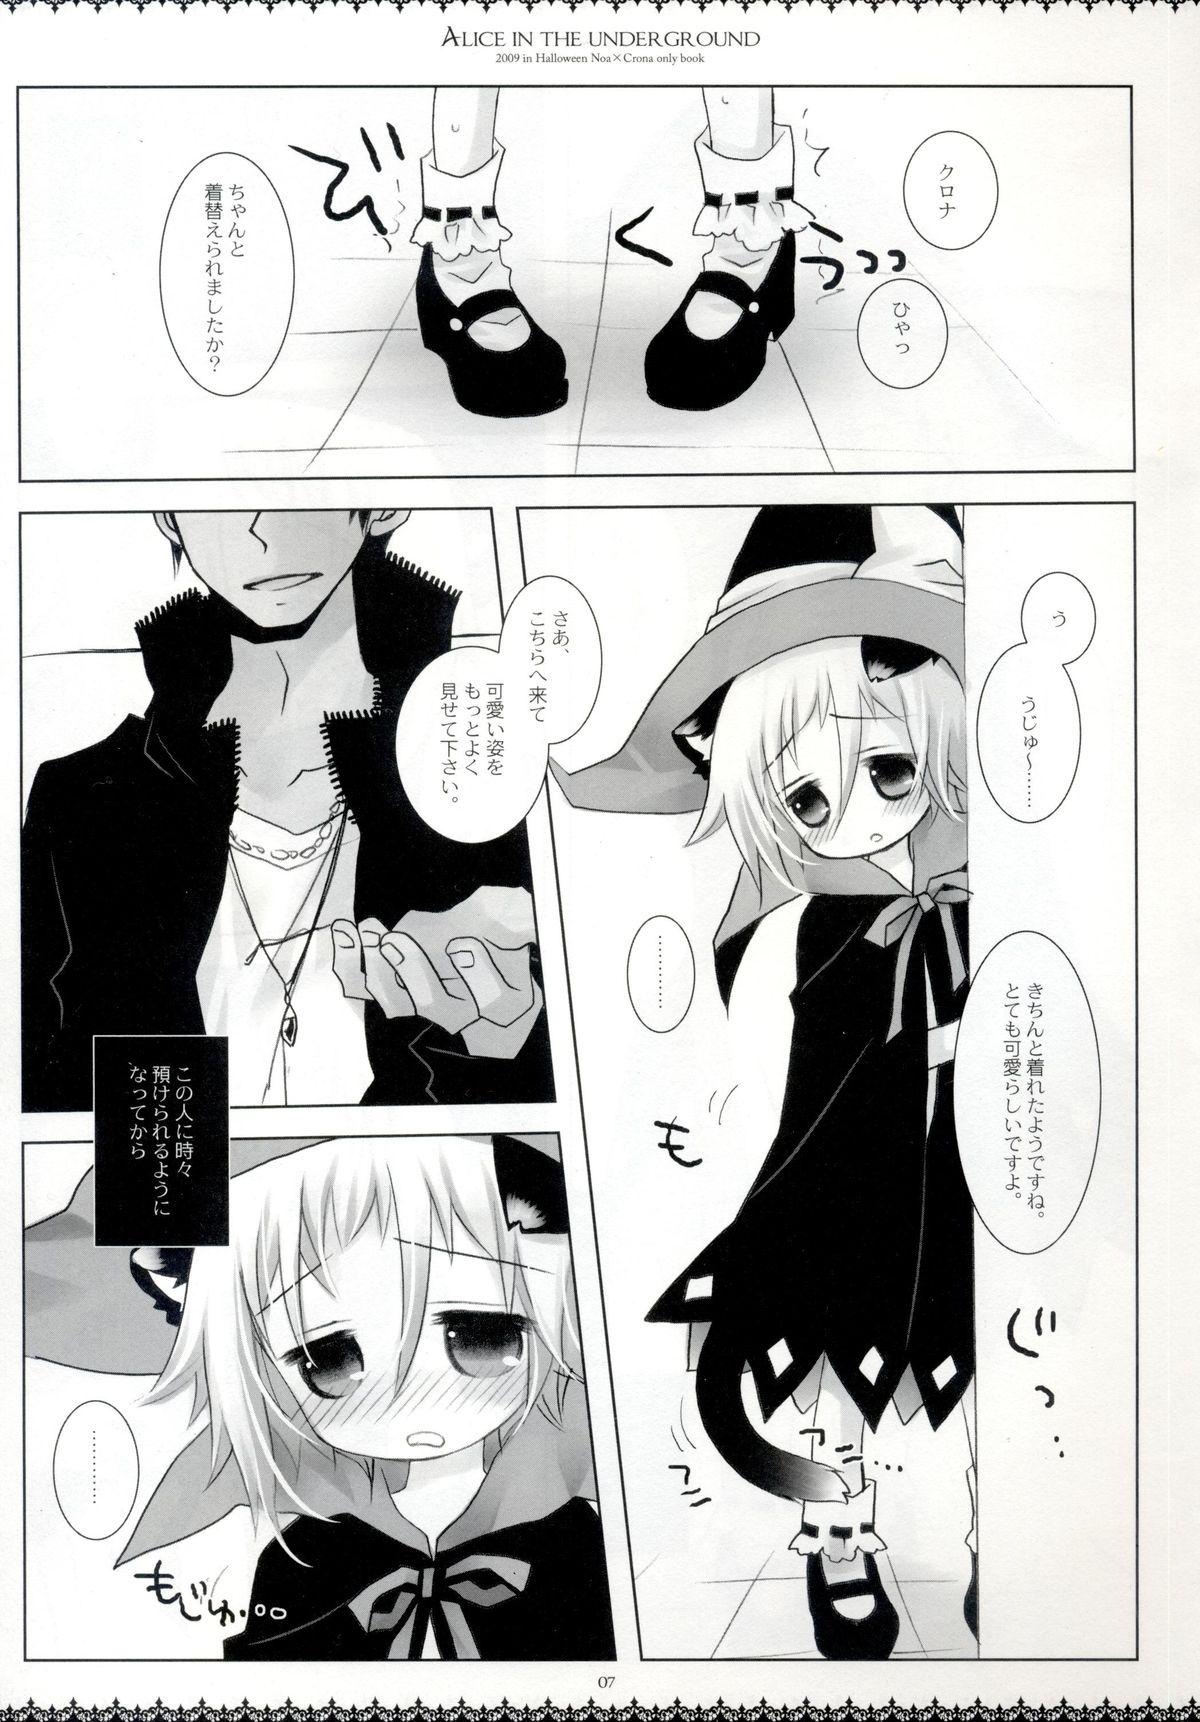 Small Tits Porn Alice in the underground - Soul eater Submission - Page 6